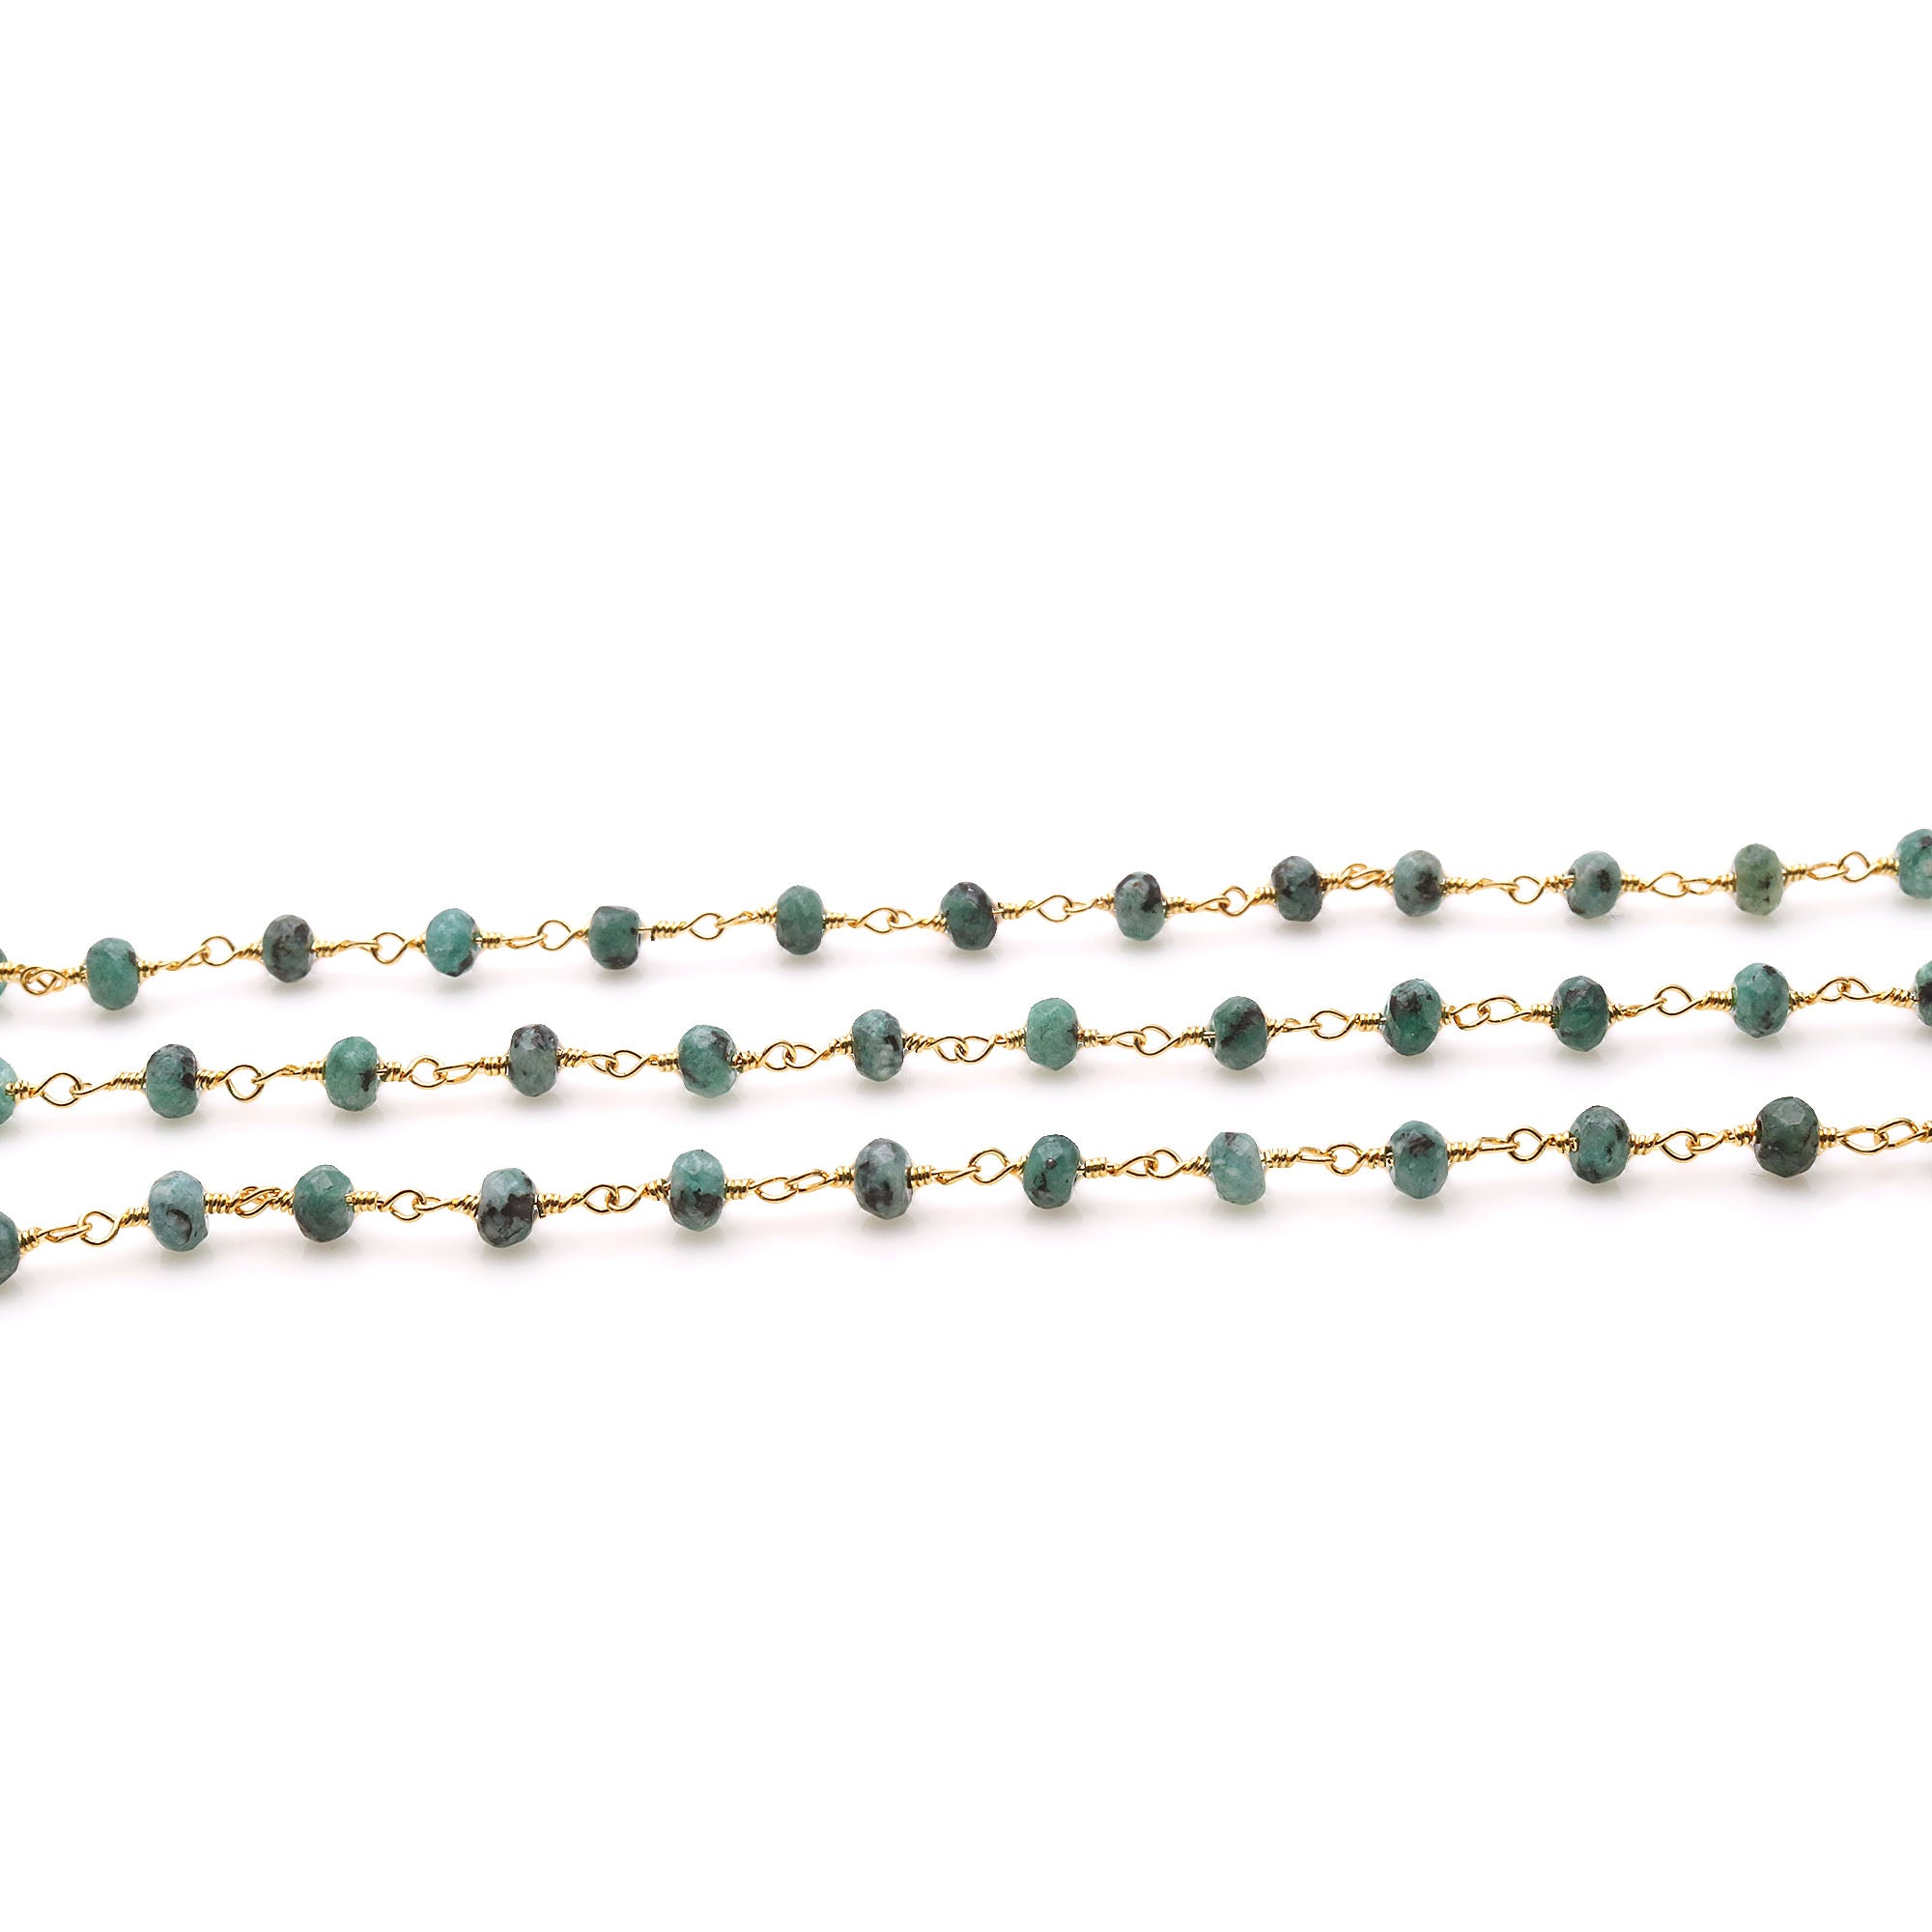 Chrysocolla Jade Faceted Beads 4mm Gold Plated Wire Wrapped Rosary Chain - GemMartUSA